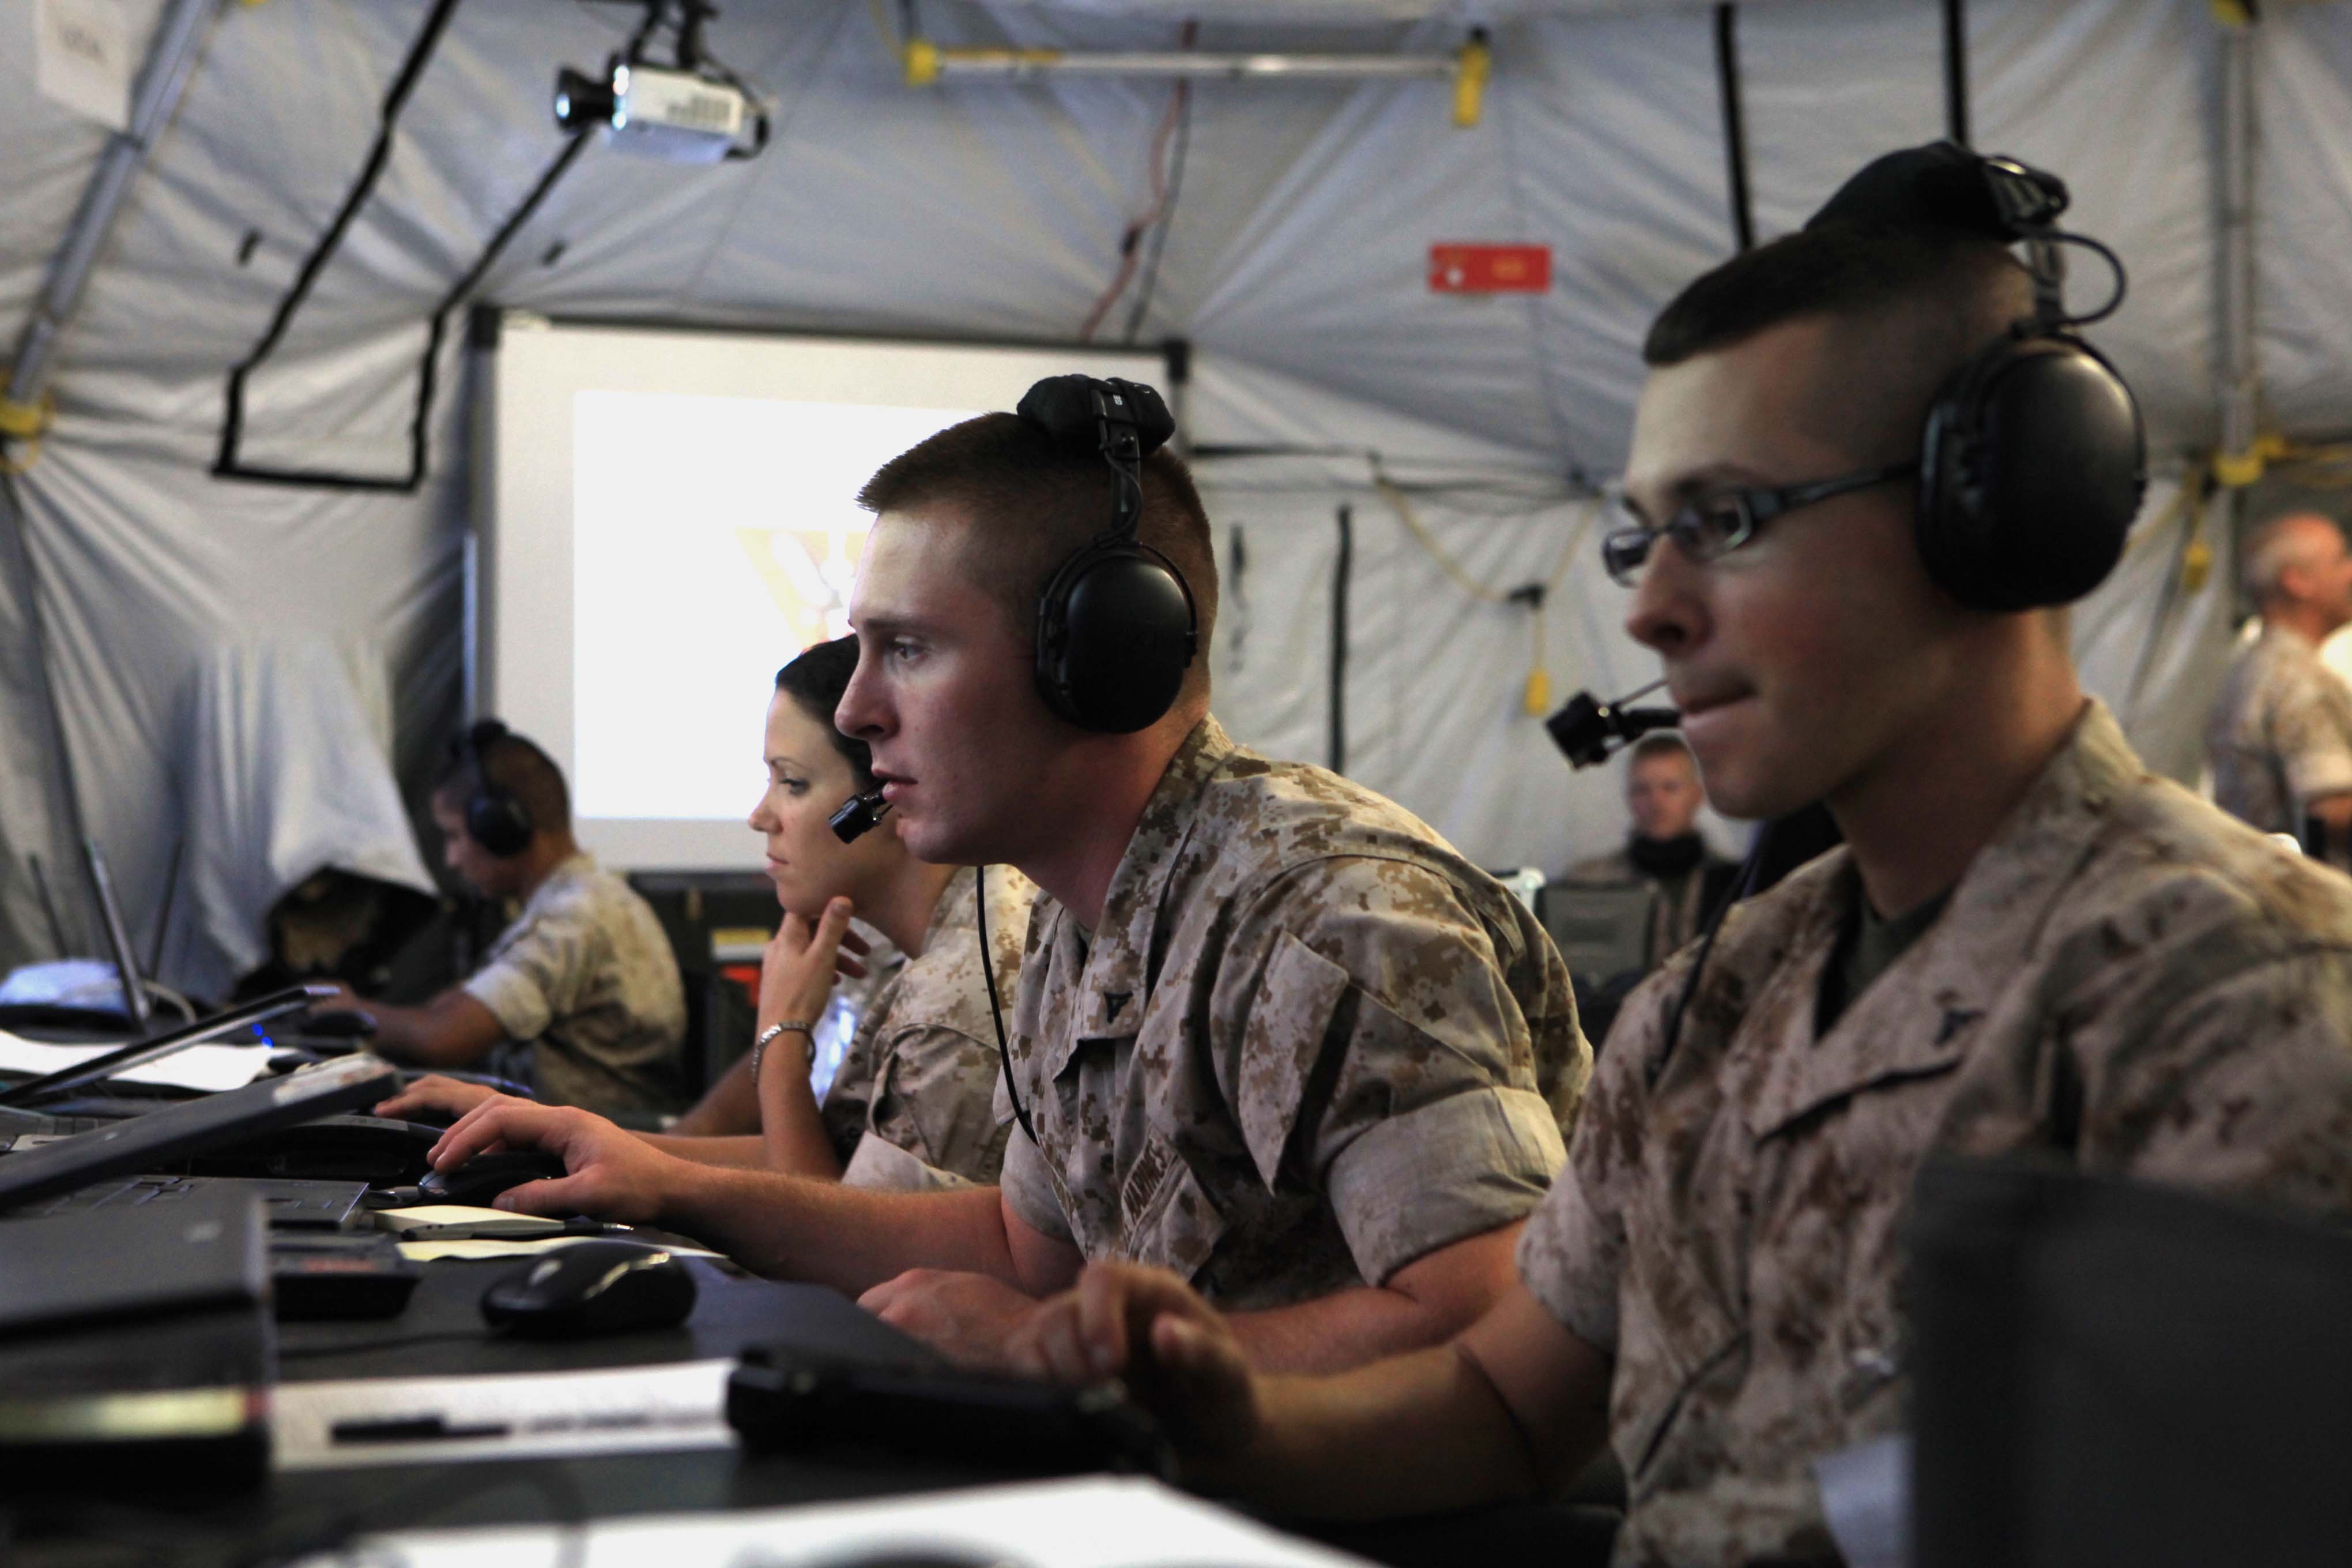 Marine tactical air command squadron 48 Marines receive aircraft and ground troop information on their monitors during Operation Javelin Thrust at Marine Corps Air Station Yuma, Ariz., July 24, 2011. US Marine Corps photo.